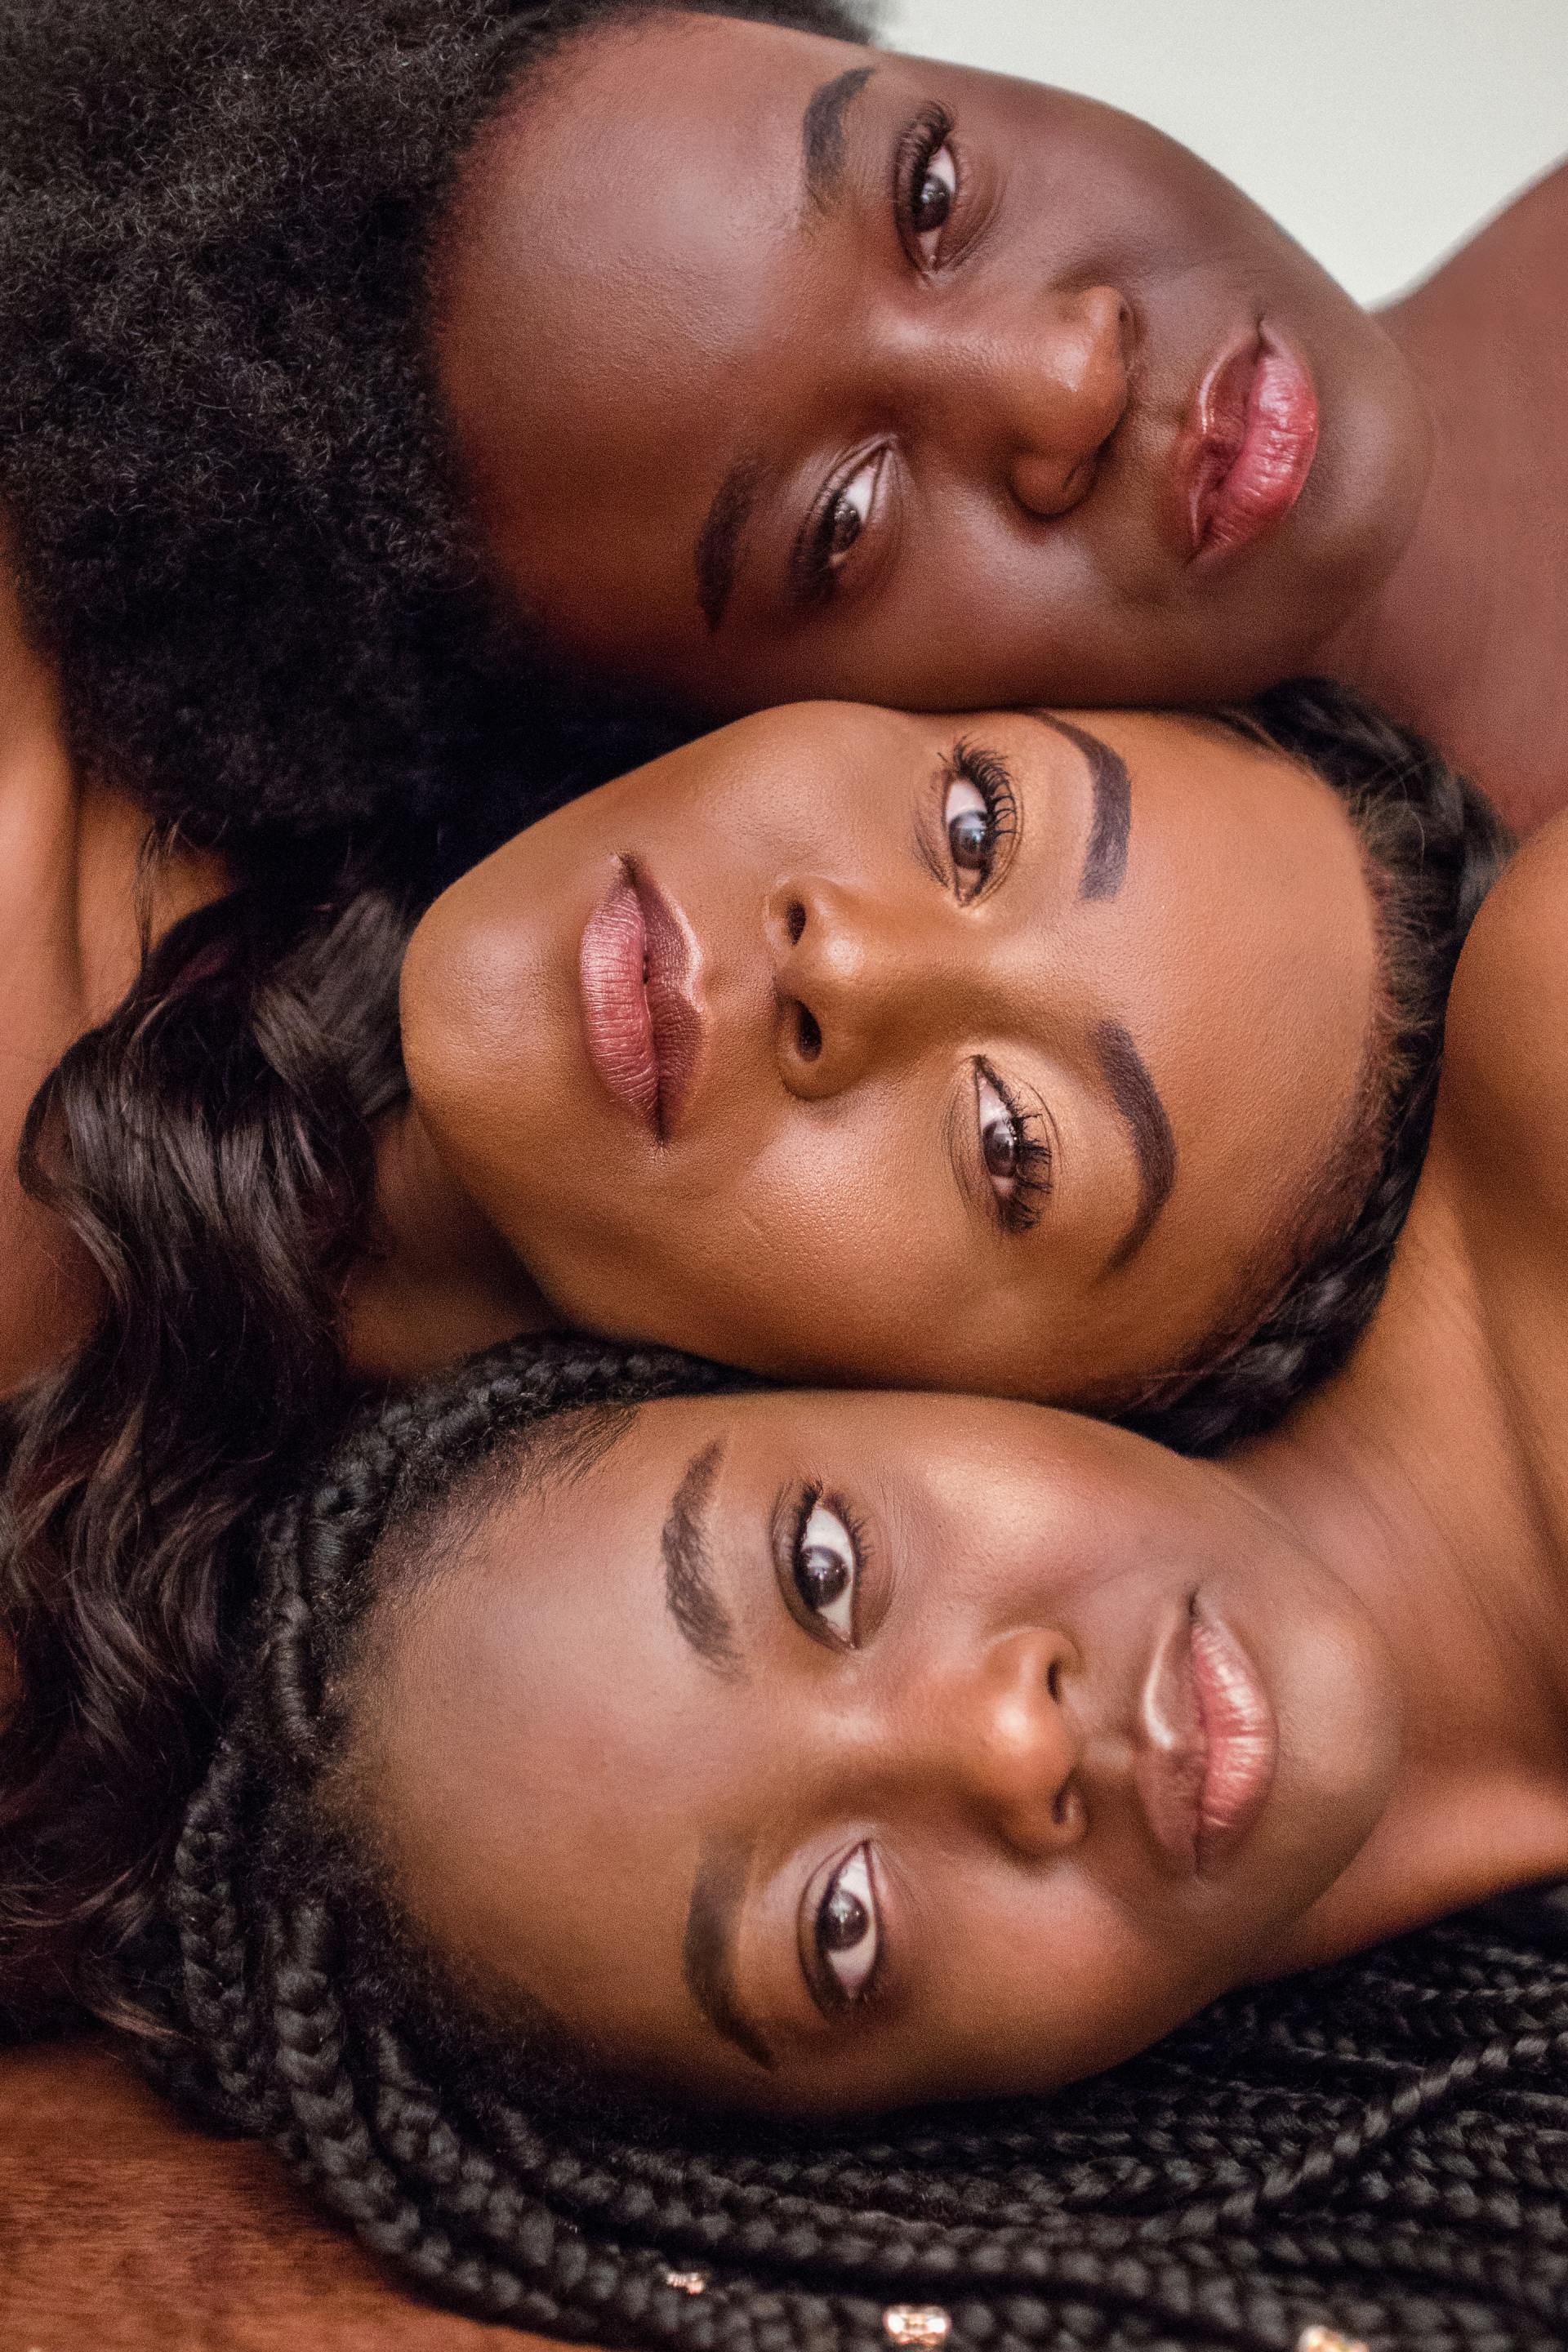 Three women are laying on top of each other and looking at the camera.